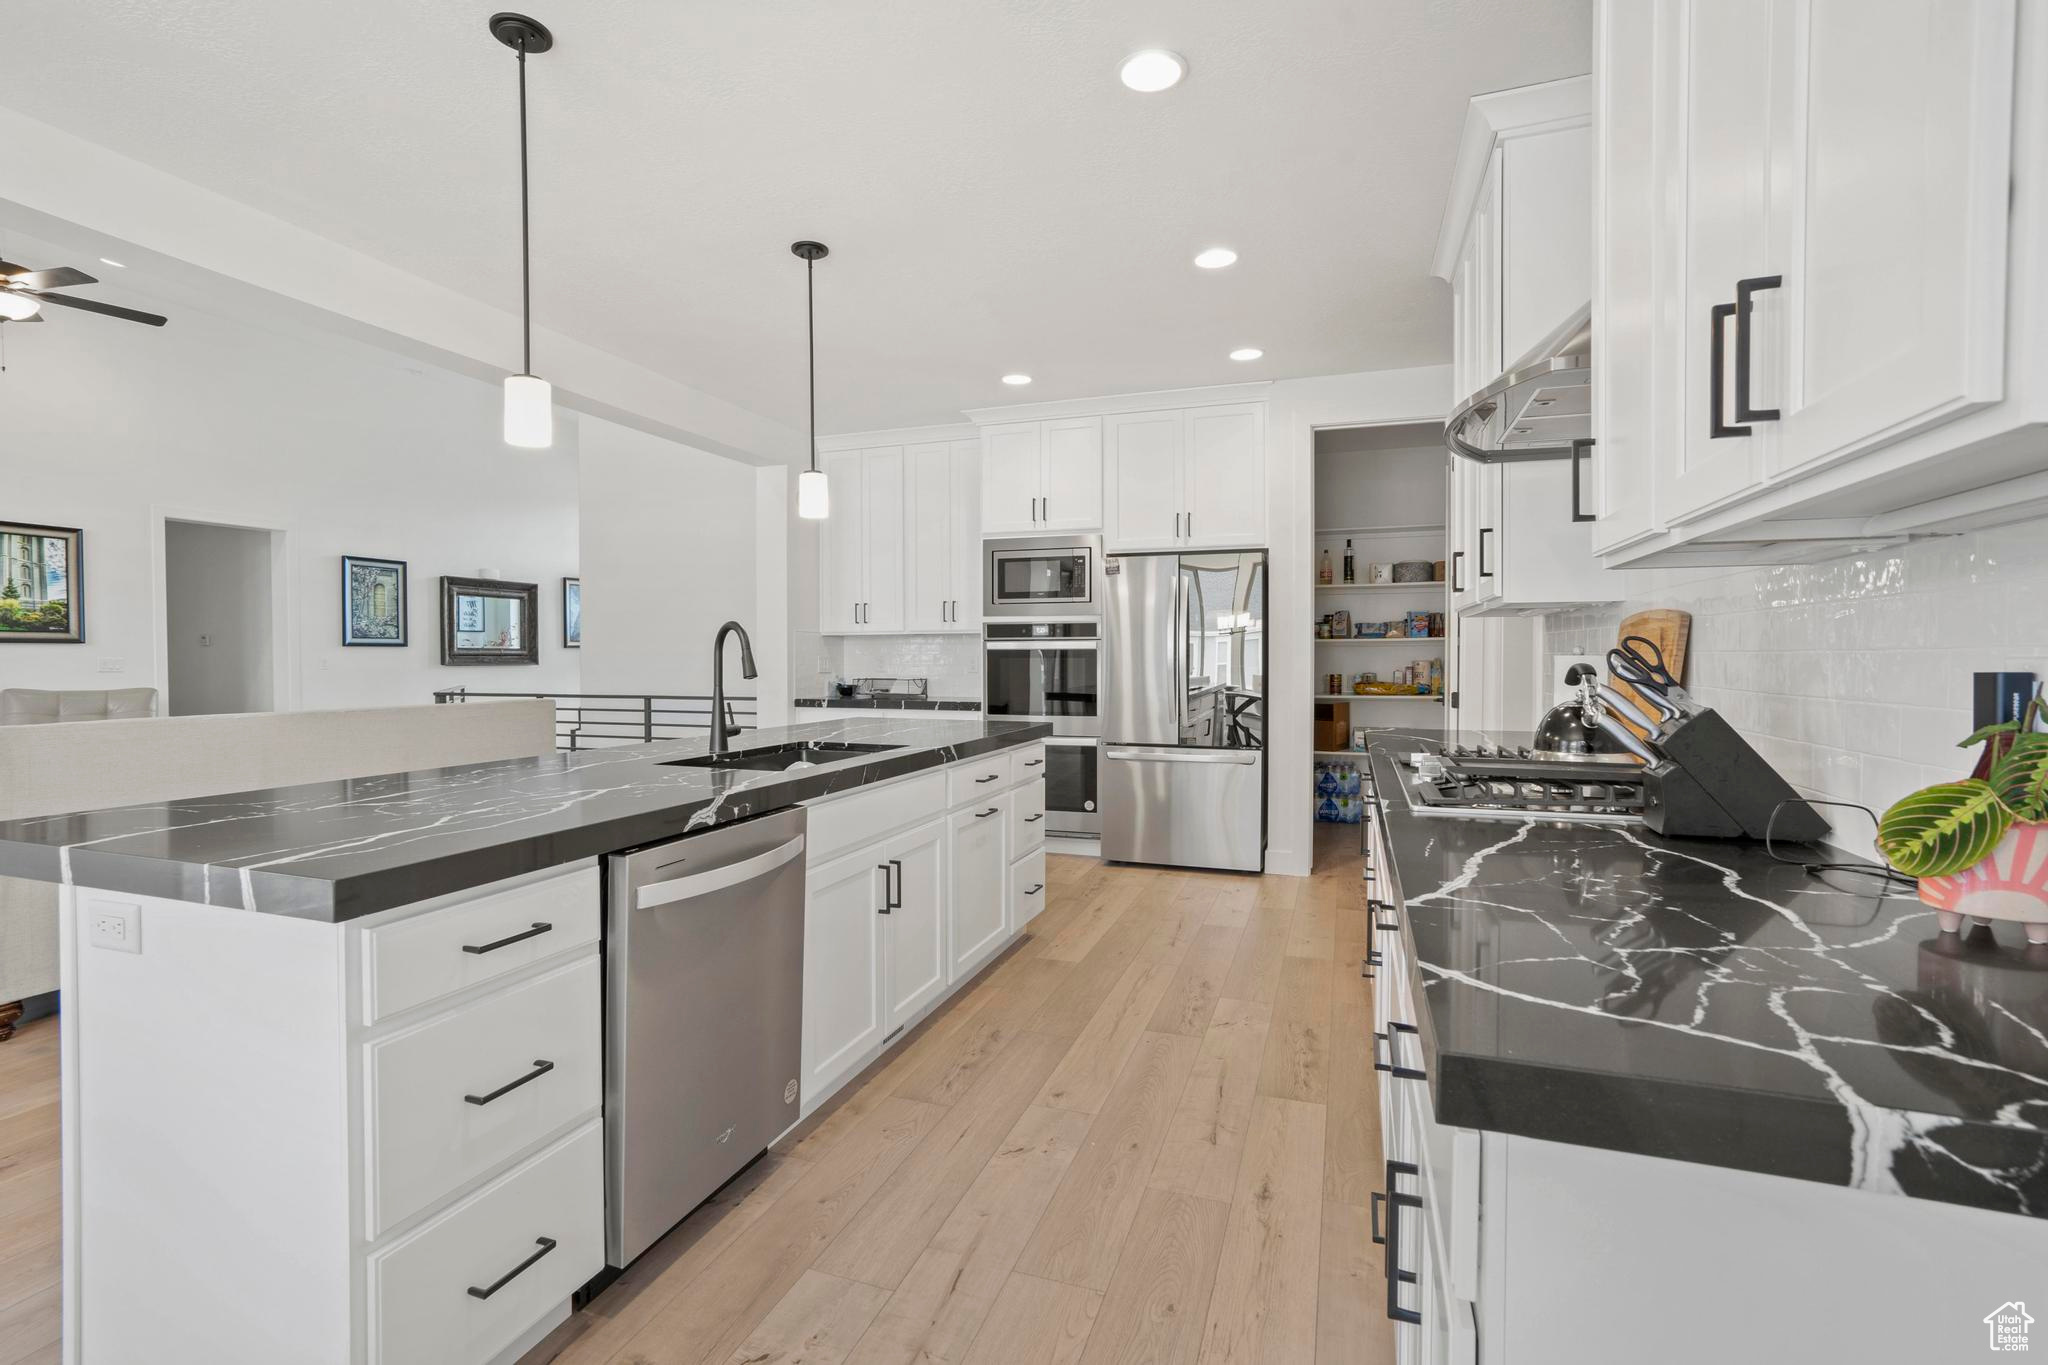 Kitchen with tasteful backsplash, appliances with stainless steel finishes, a center island with sink, white cabinets, and ceiling fan